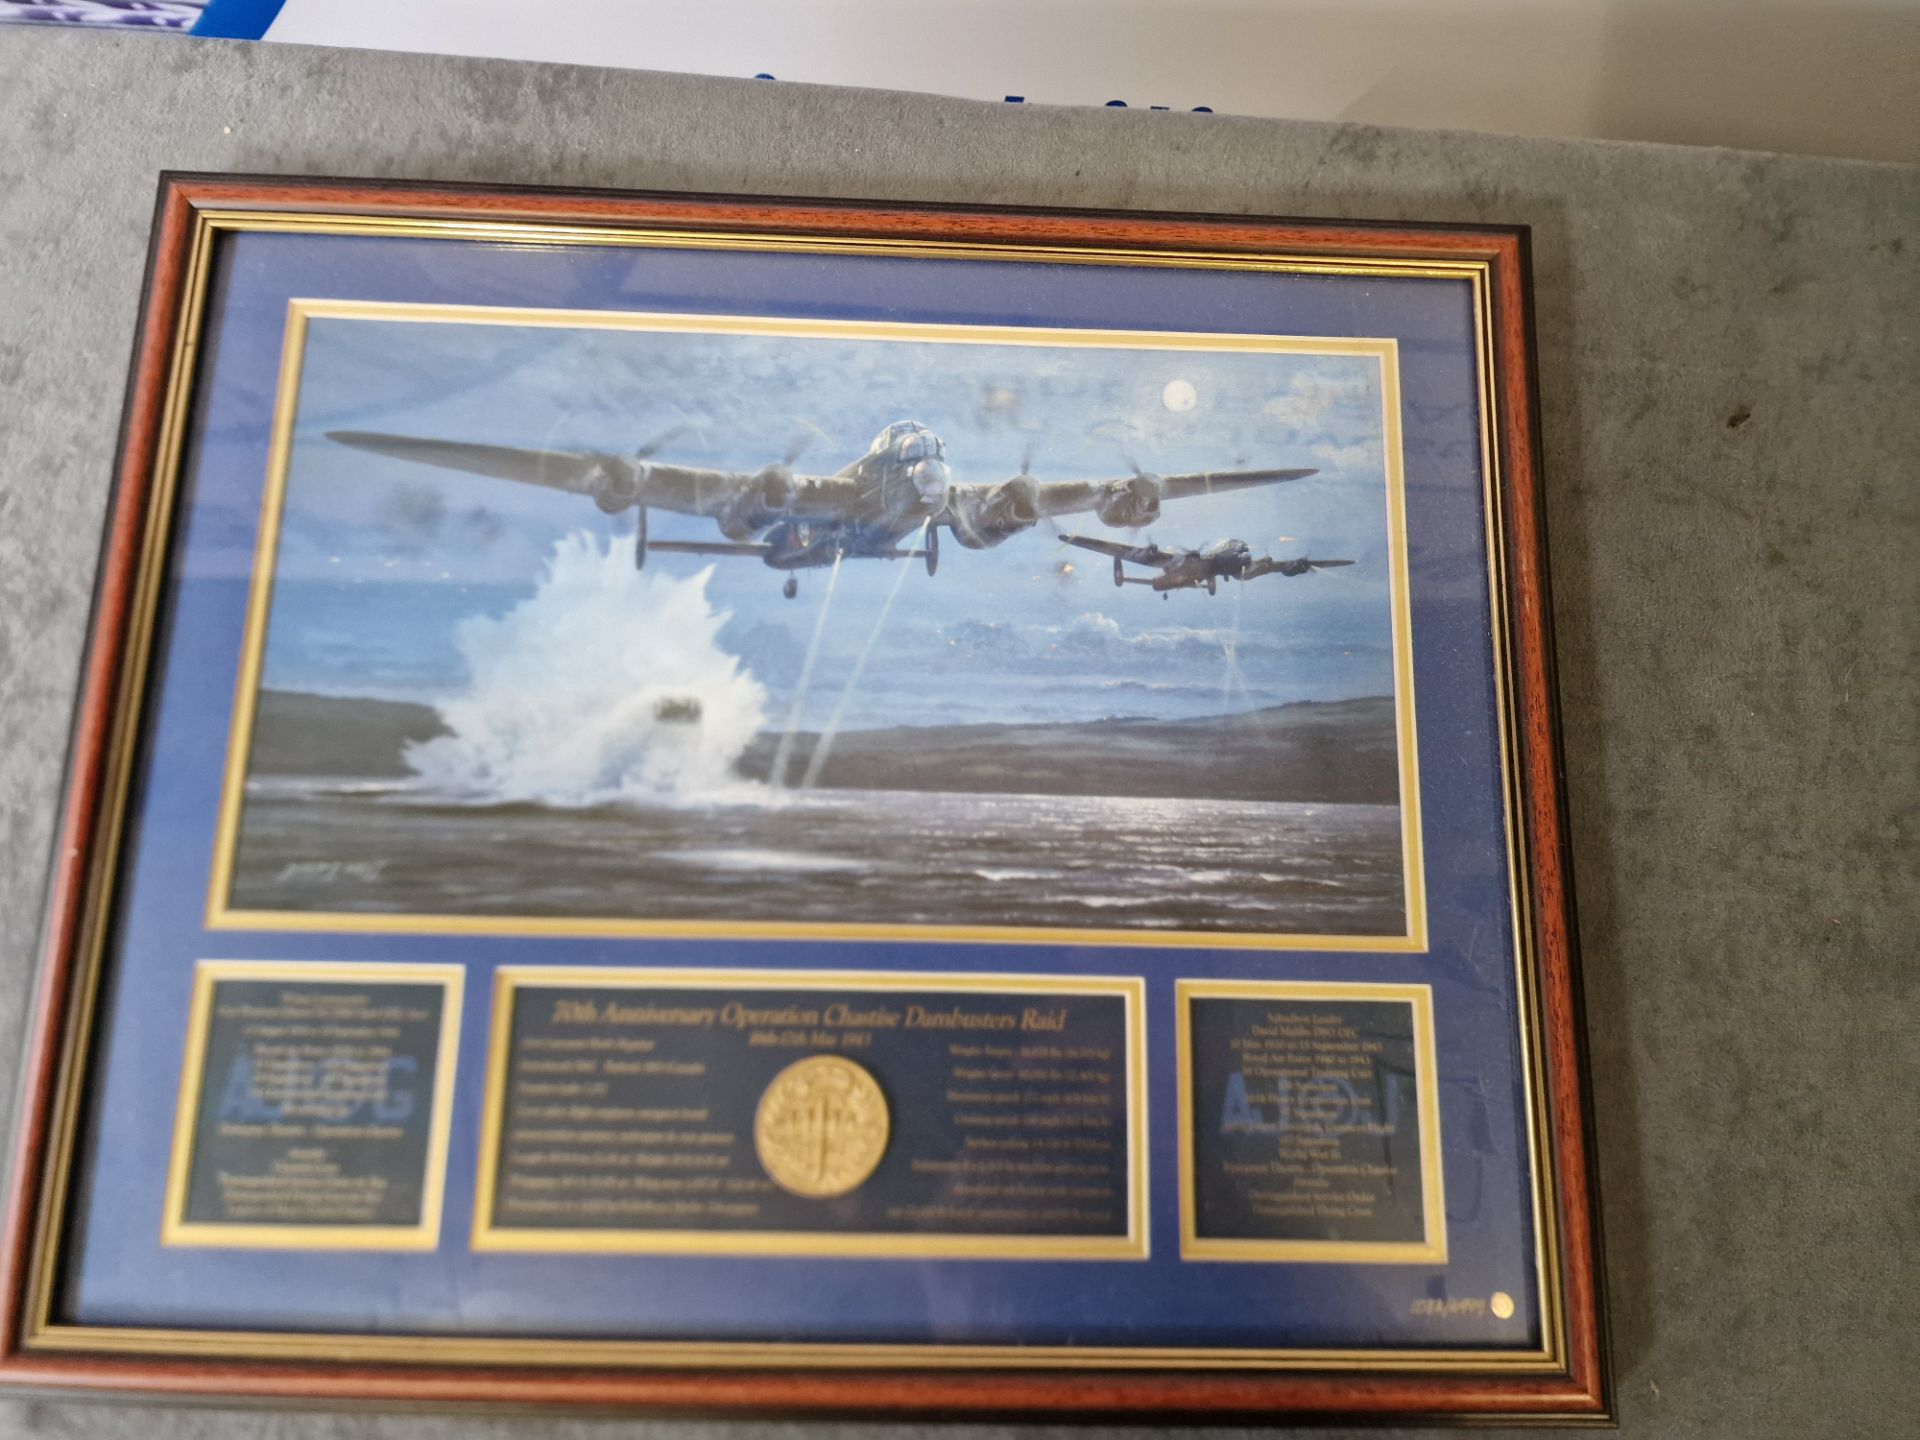 Lancaster Dambusters Commemorative Print Limited To 4999 Editions With Artwork By Philip West. The - Image 3 of 8